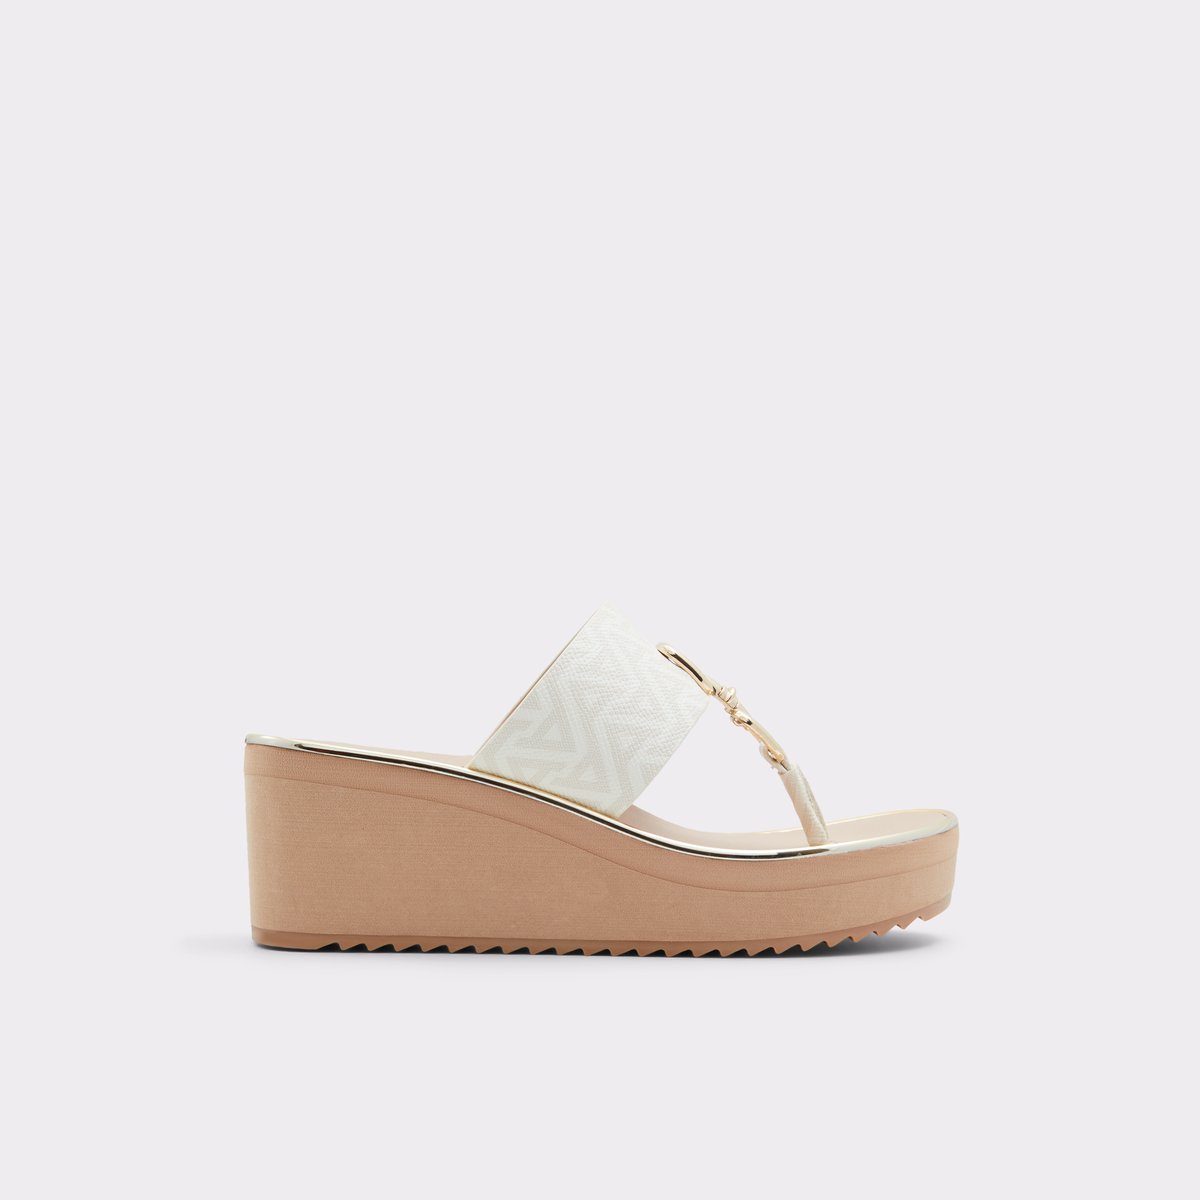 Maesllan White Synthetic Mixed Material Women's Sandals | ALDO Canada